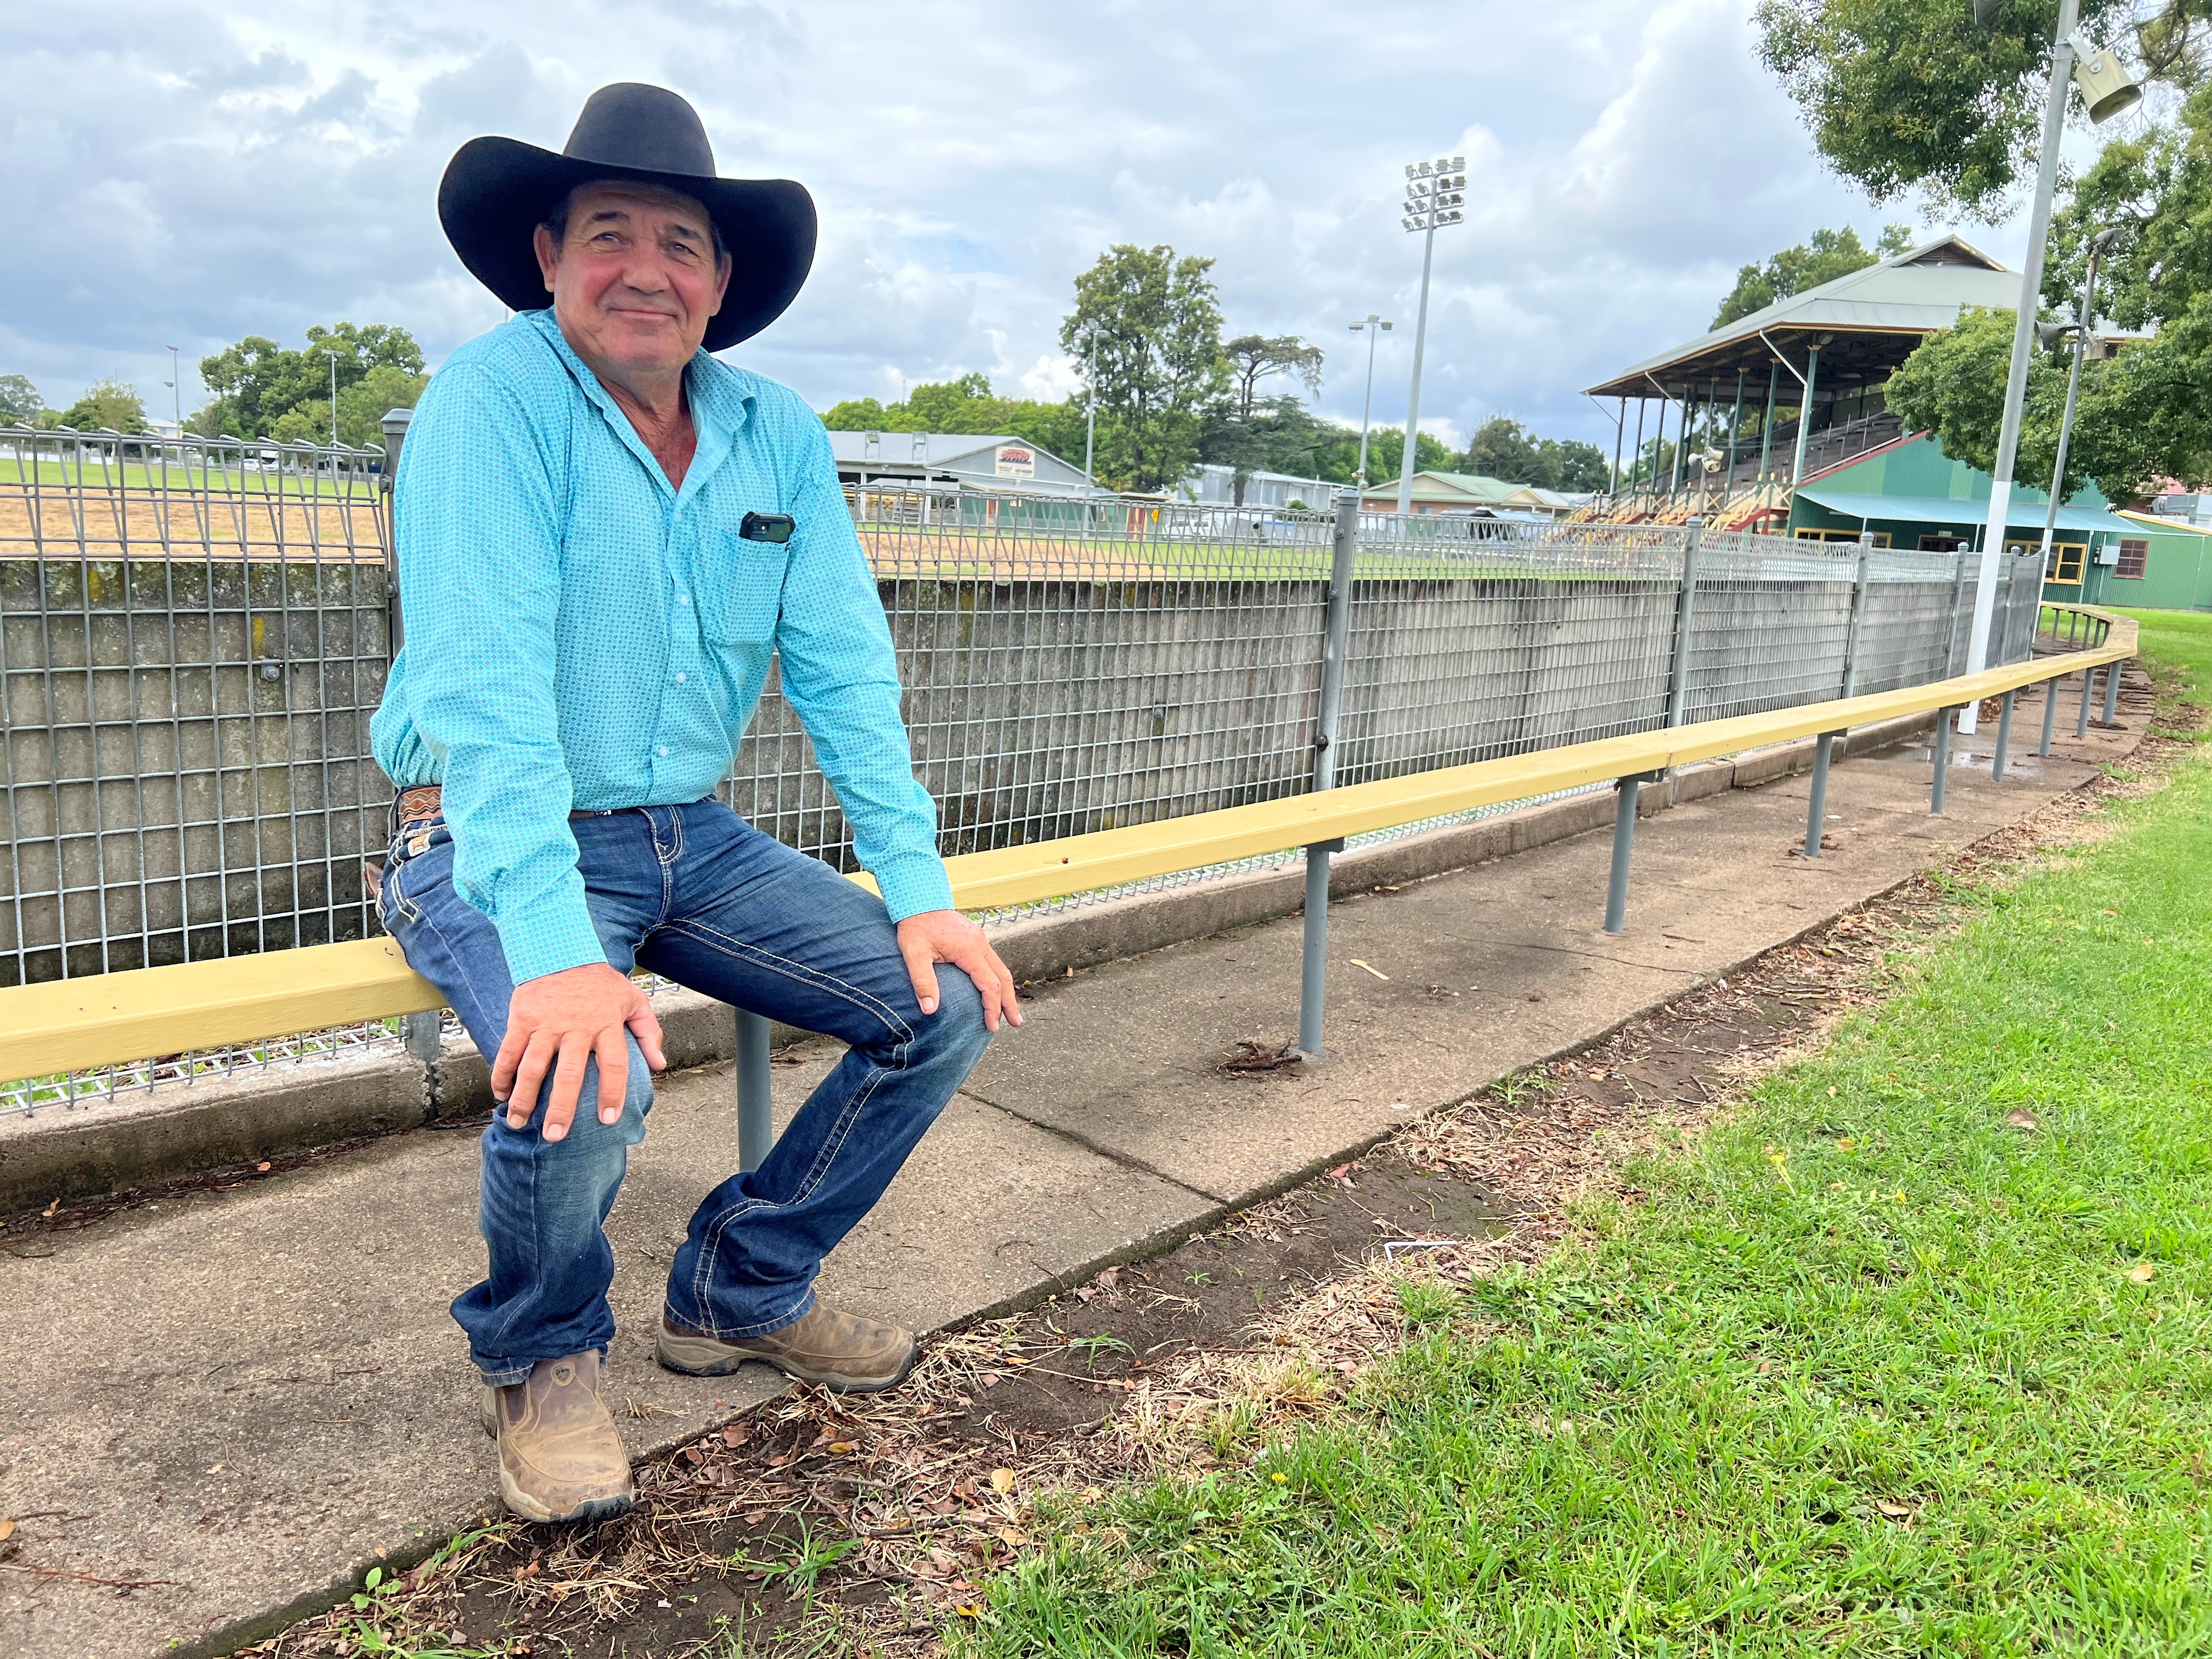 Complete Parts Rodeo returns to Singleton